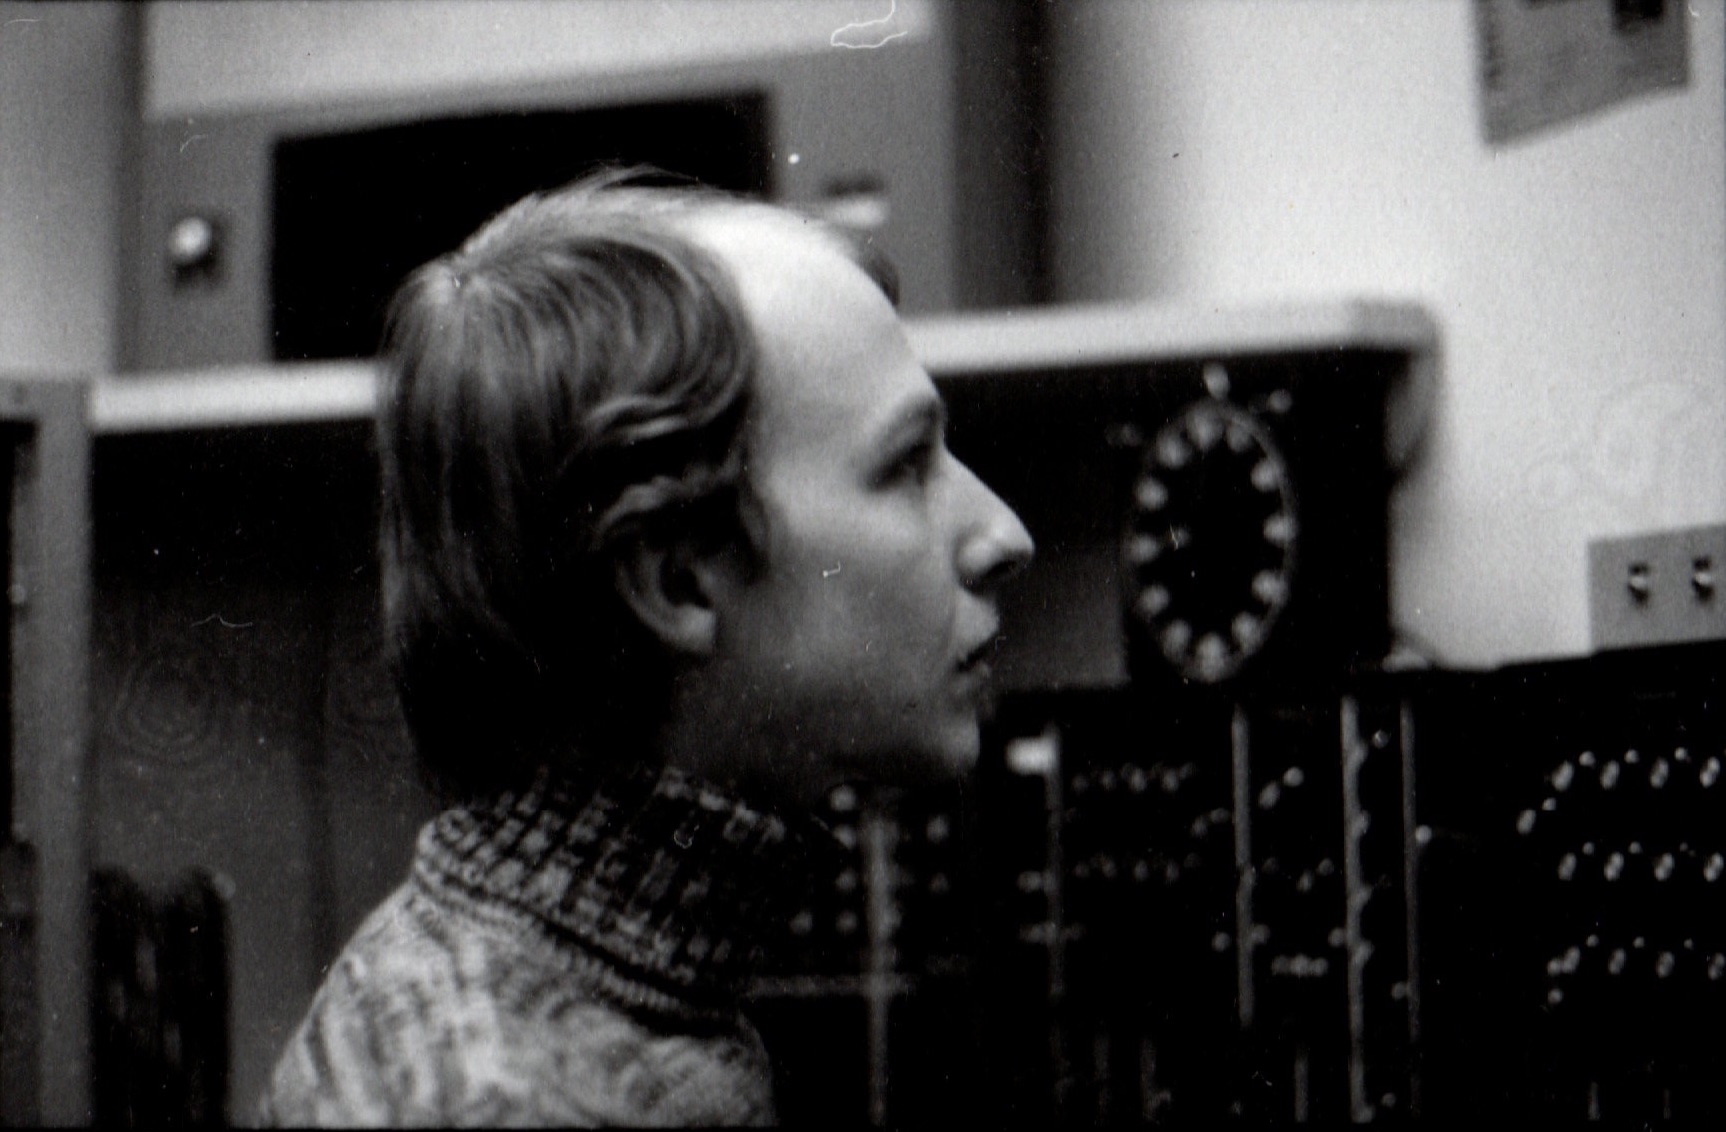 D. Geoffrey Bell composing in the University of Calgary Electronic Music Lab in 1977